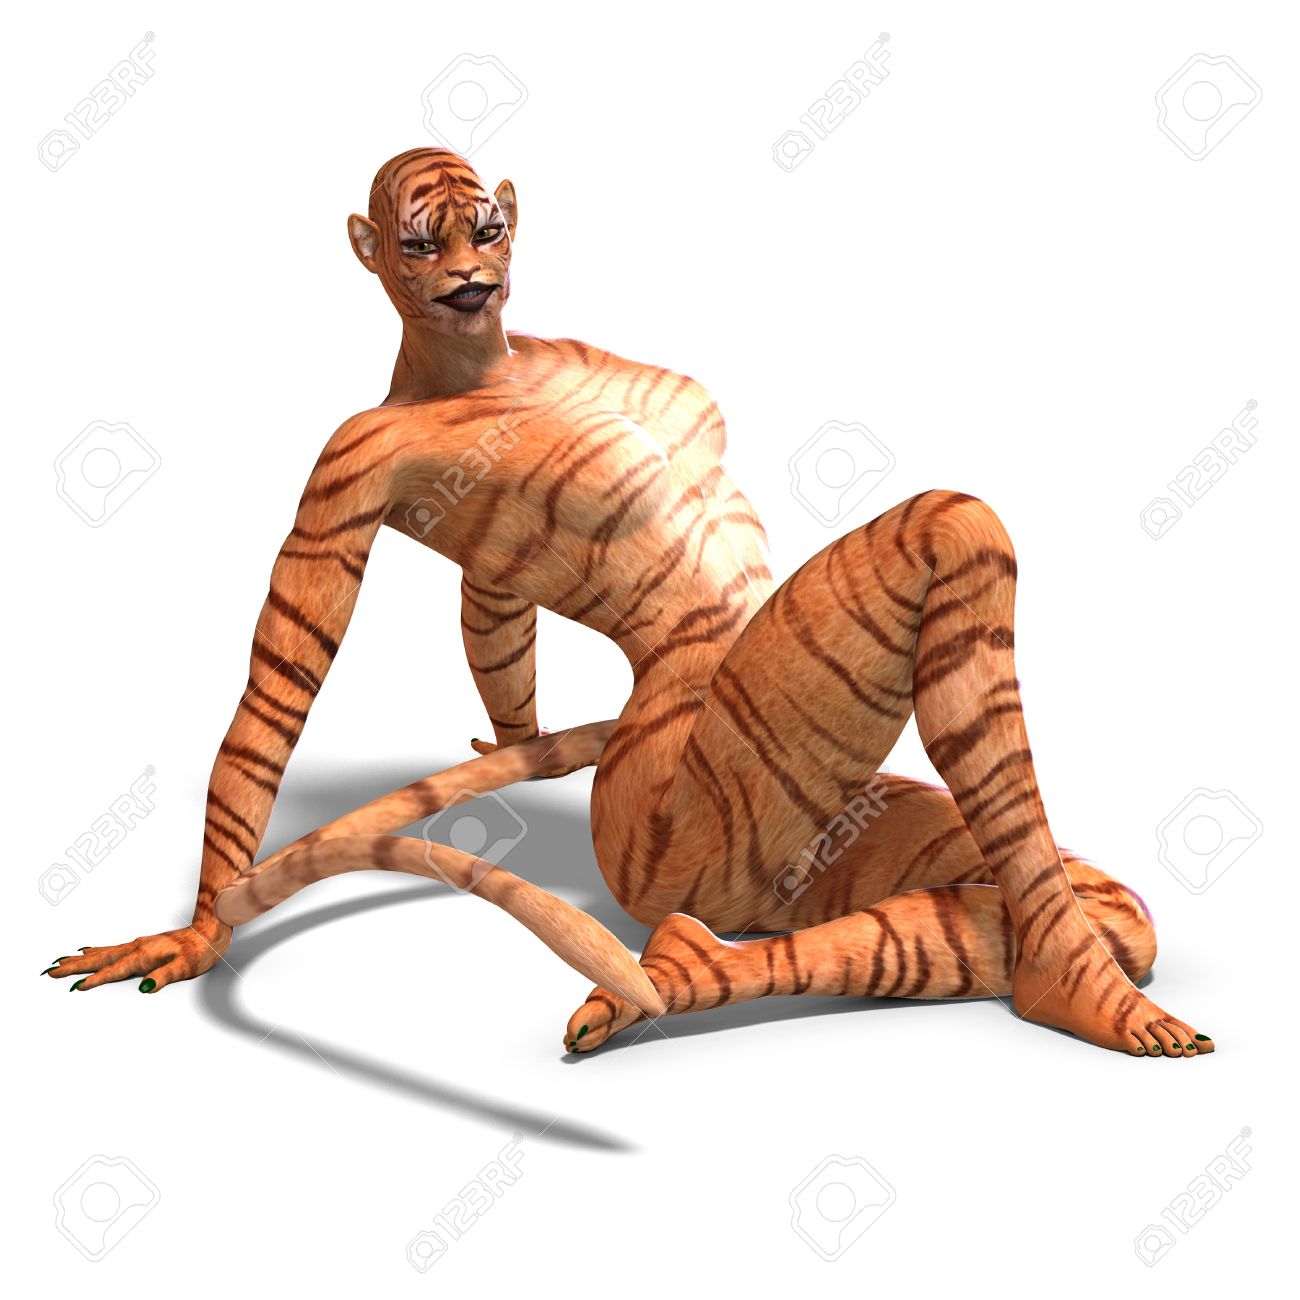 Female Fantasy Figure Tiger Stock Photo, Picture And Royalty Free.